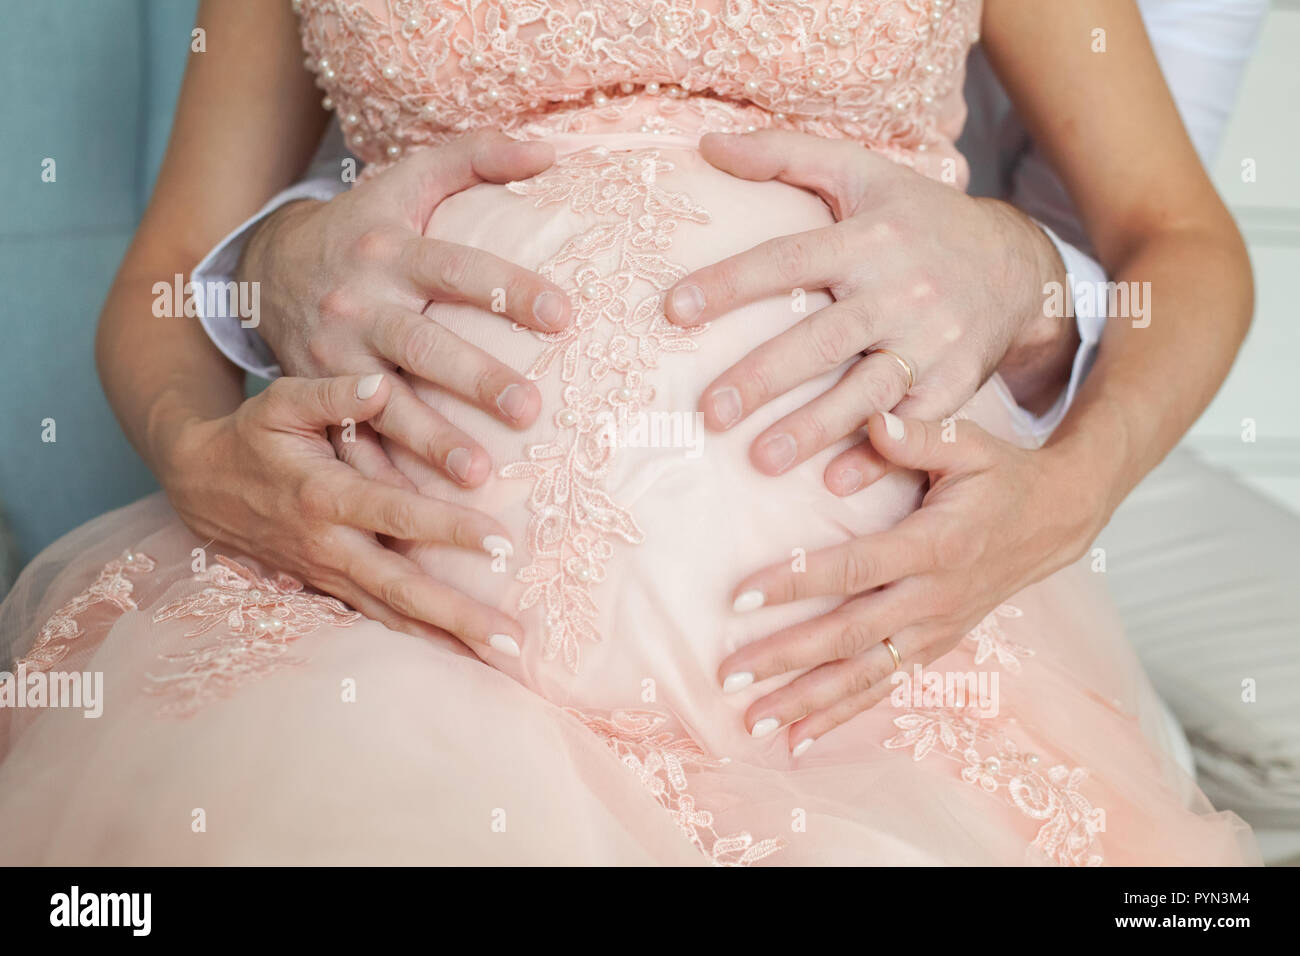 Pregnant belly. Parental love and care concept Stock Photo